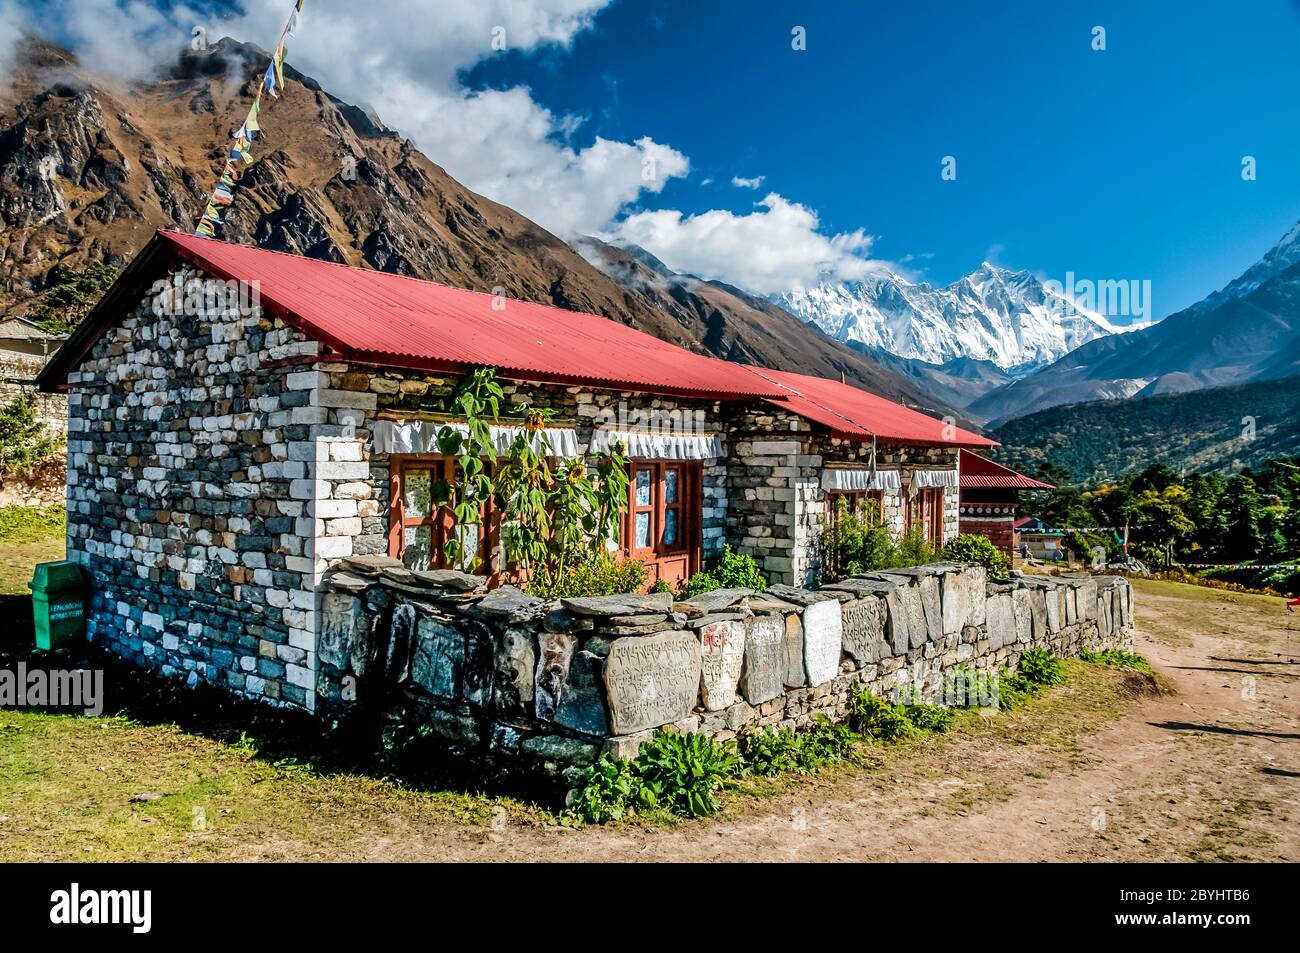 Nepal. Trek to Island Peak. Colourful scenes in and around the Thyangboche Buddhist Monastery with one of the resident monks Bungalow with Mani stone prayer wall and Mount Everest in the distant clouds Stock Photo